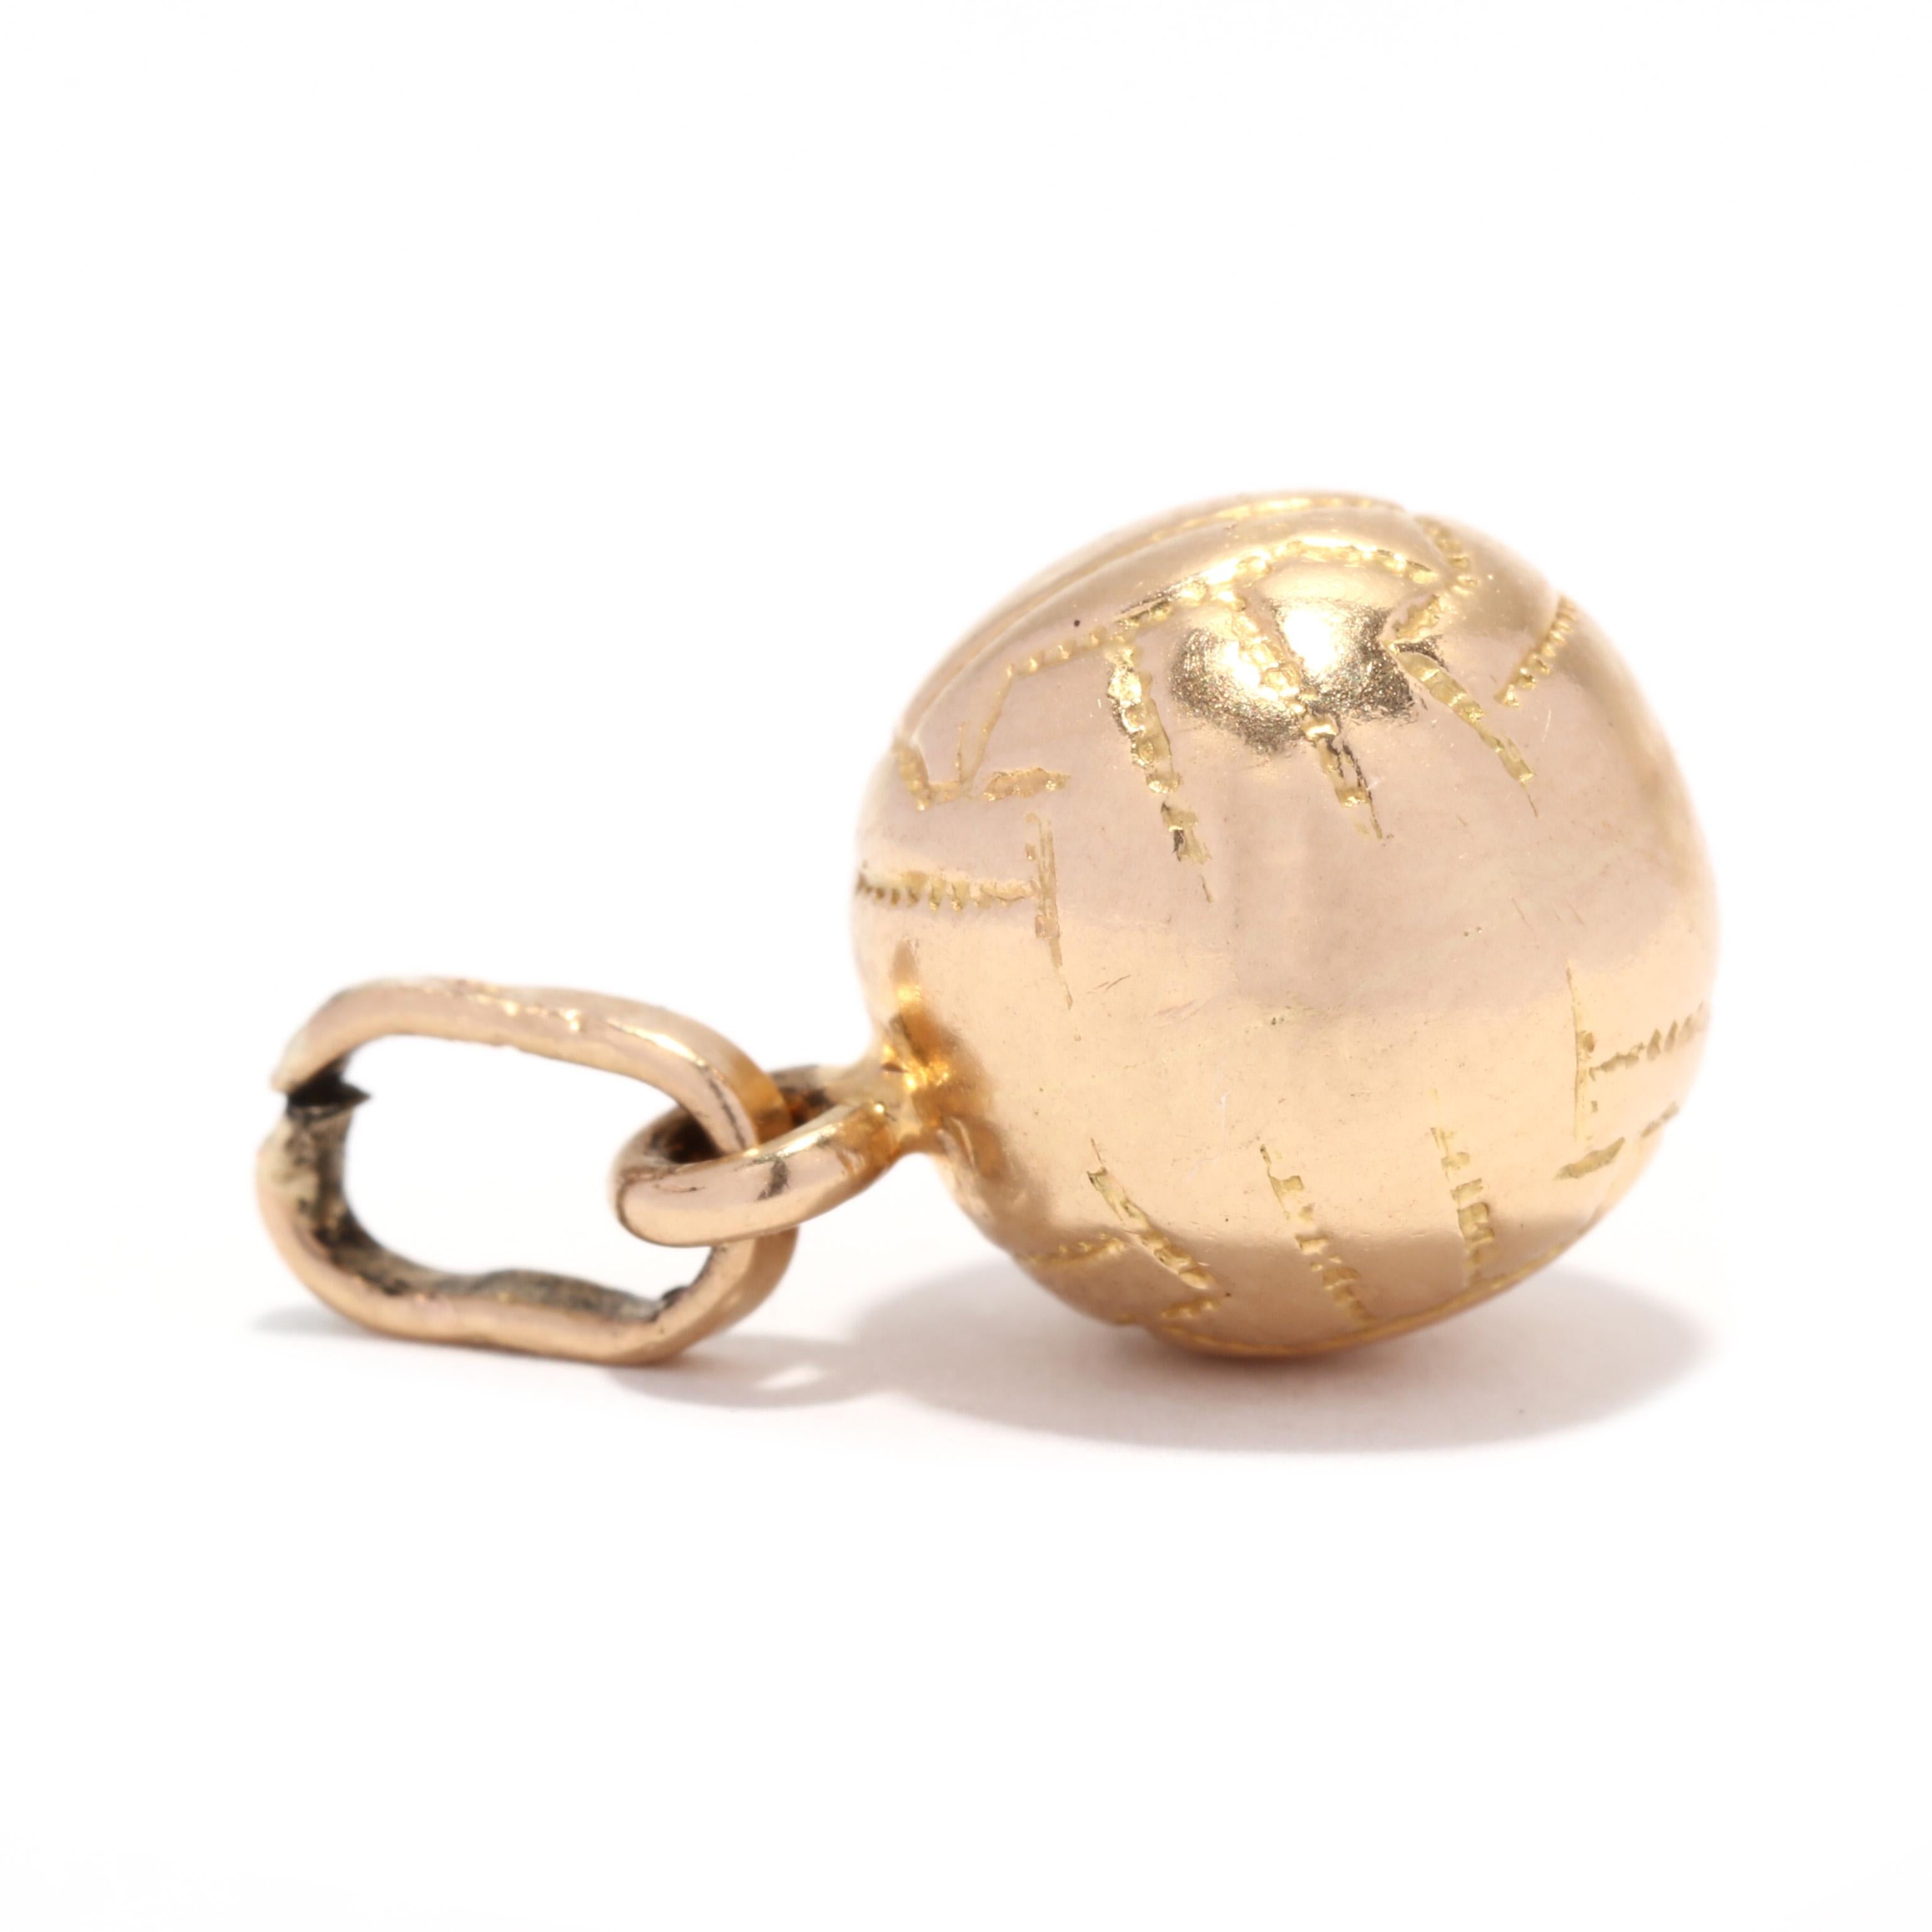 Women's or Men's Gold Volleyball Charm, 18K Gold, Small Volleyball Charm, Gold Sport Charm